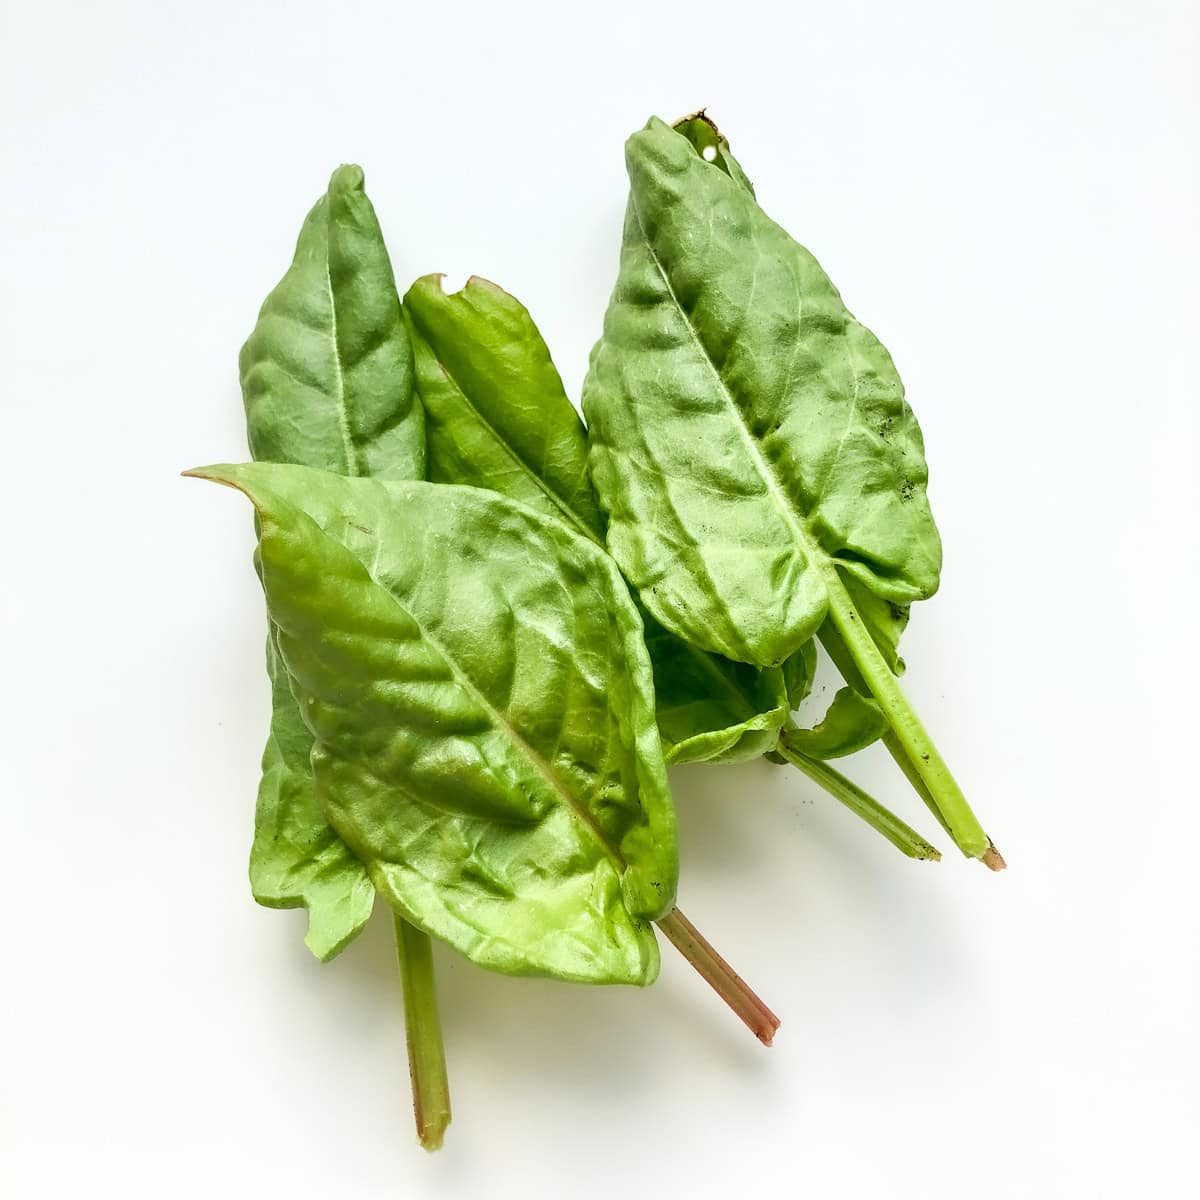 An image of sorrel on a white countertop.